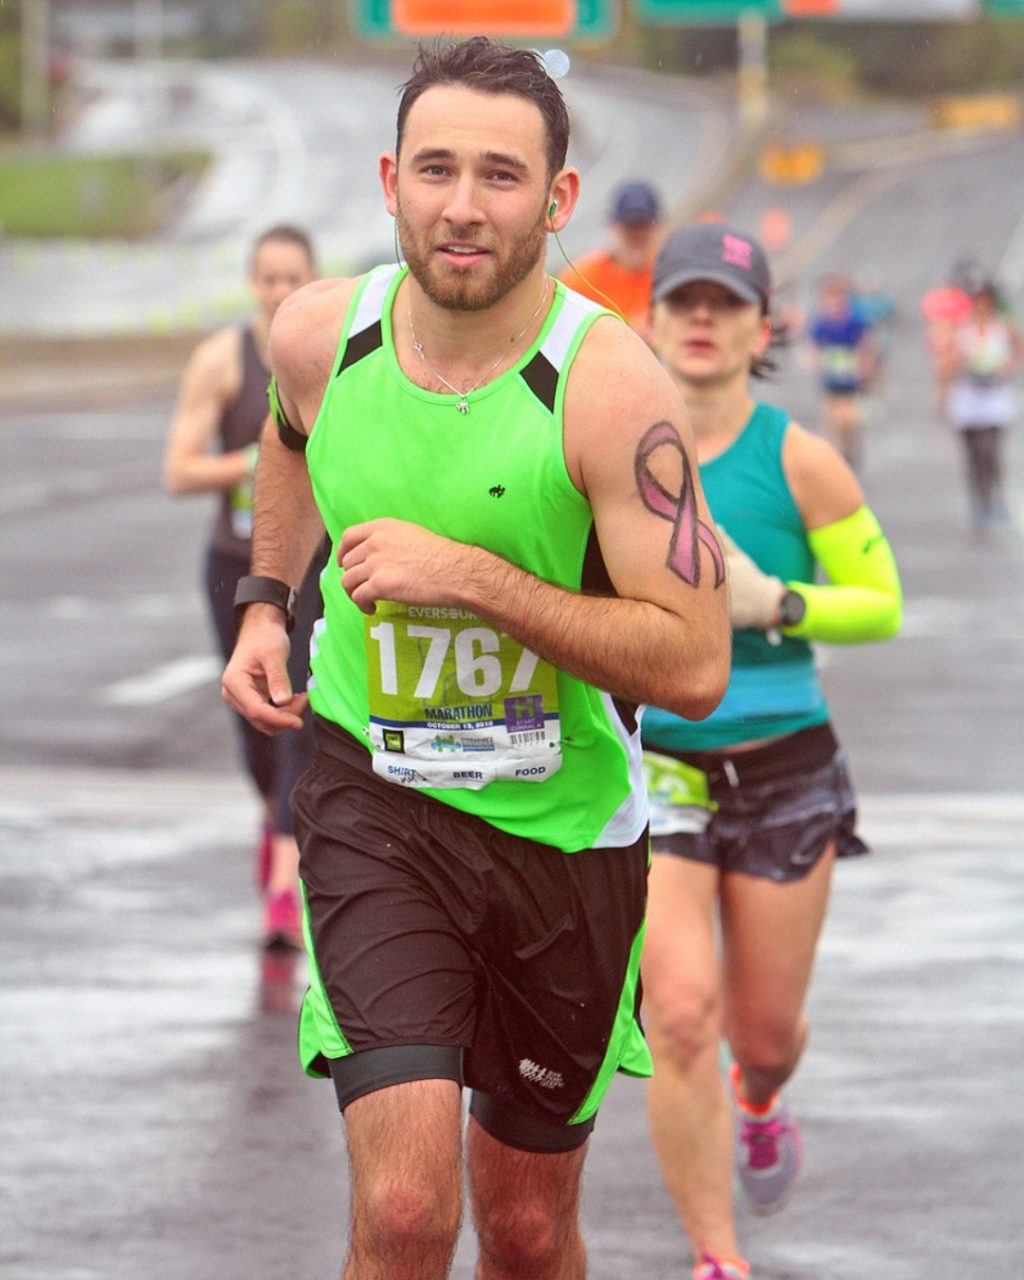 Jared is running the 2023 TCS New York City Marathon with TeamBCRF in support of his grandmothers. – The Breast Cancer Research Foundation